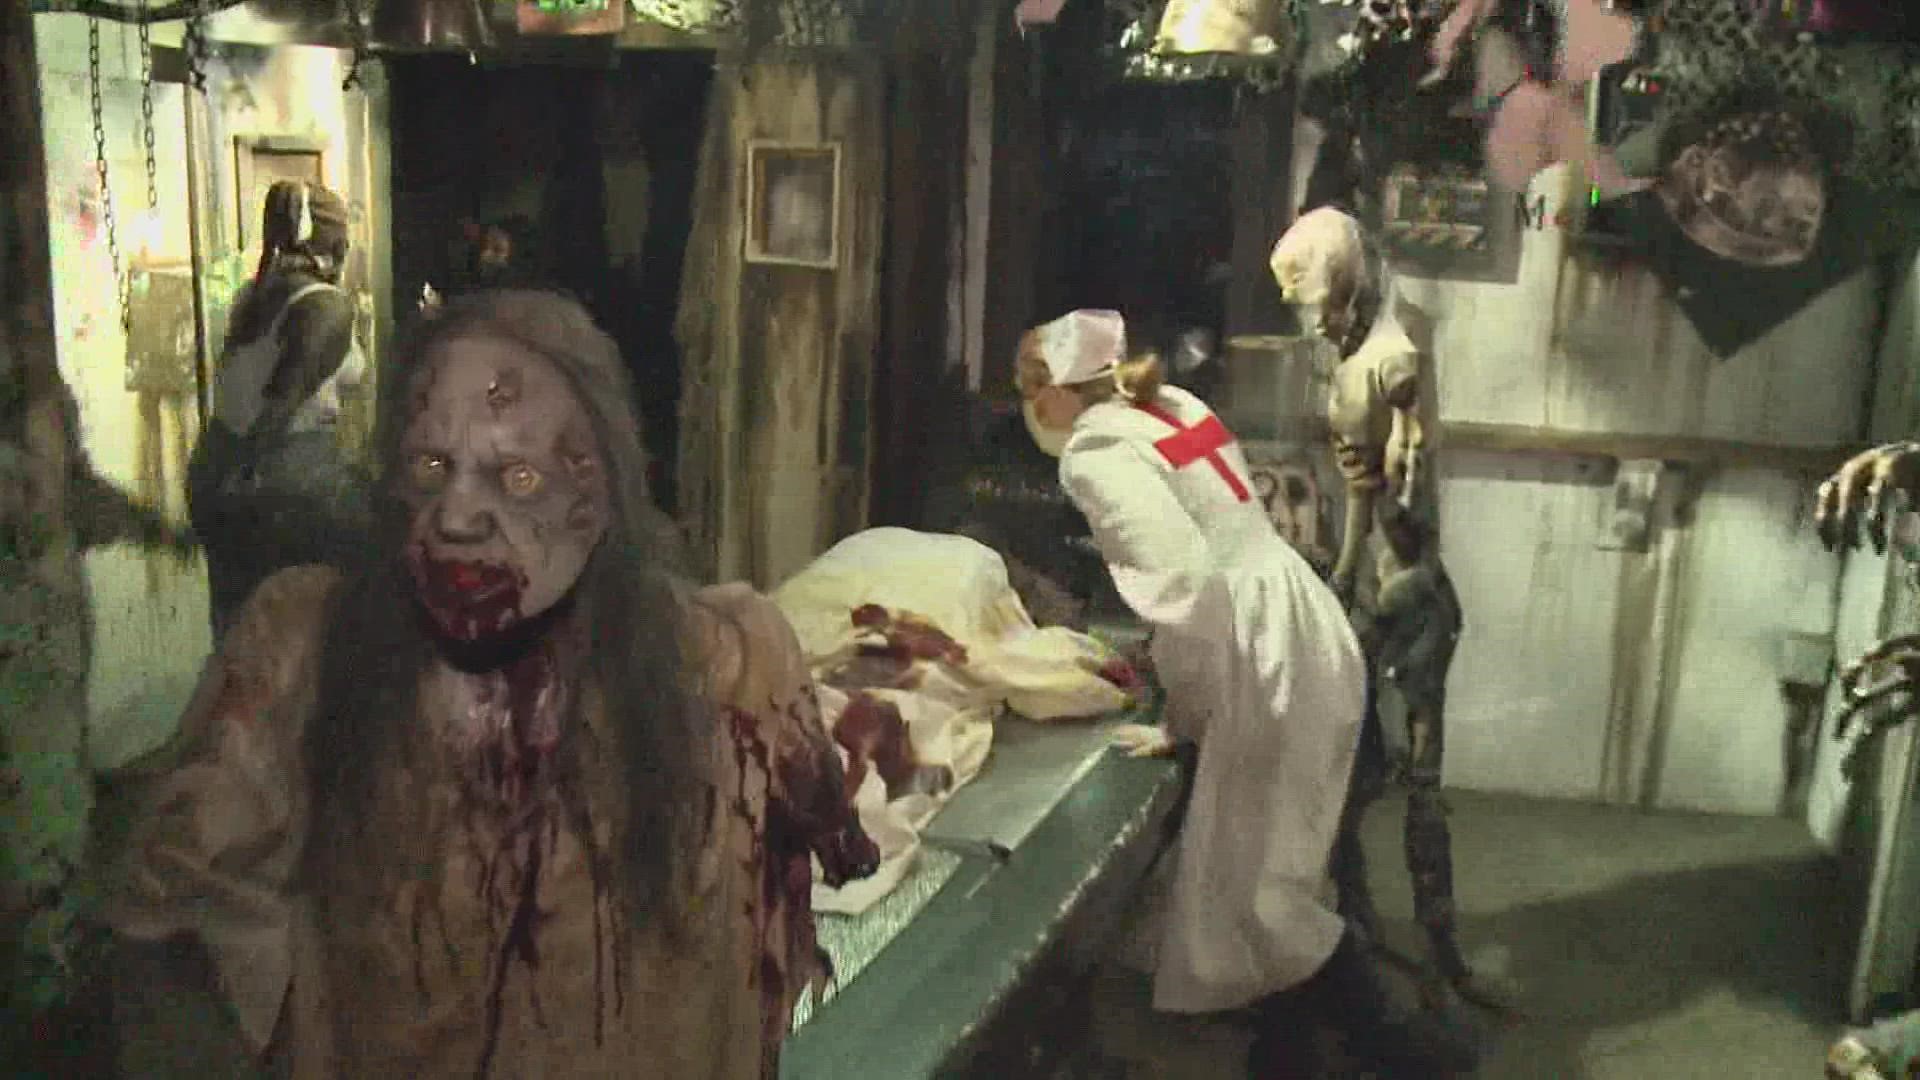 The Mortuary is back to scaring people to death this Halloween being shut down due to the pandemic.